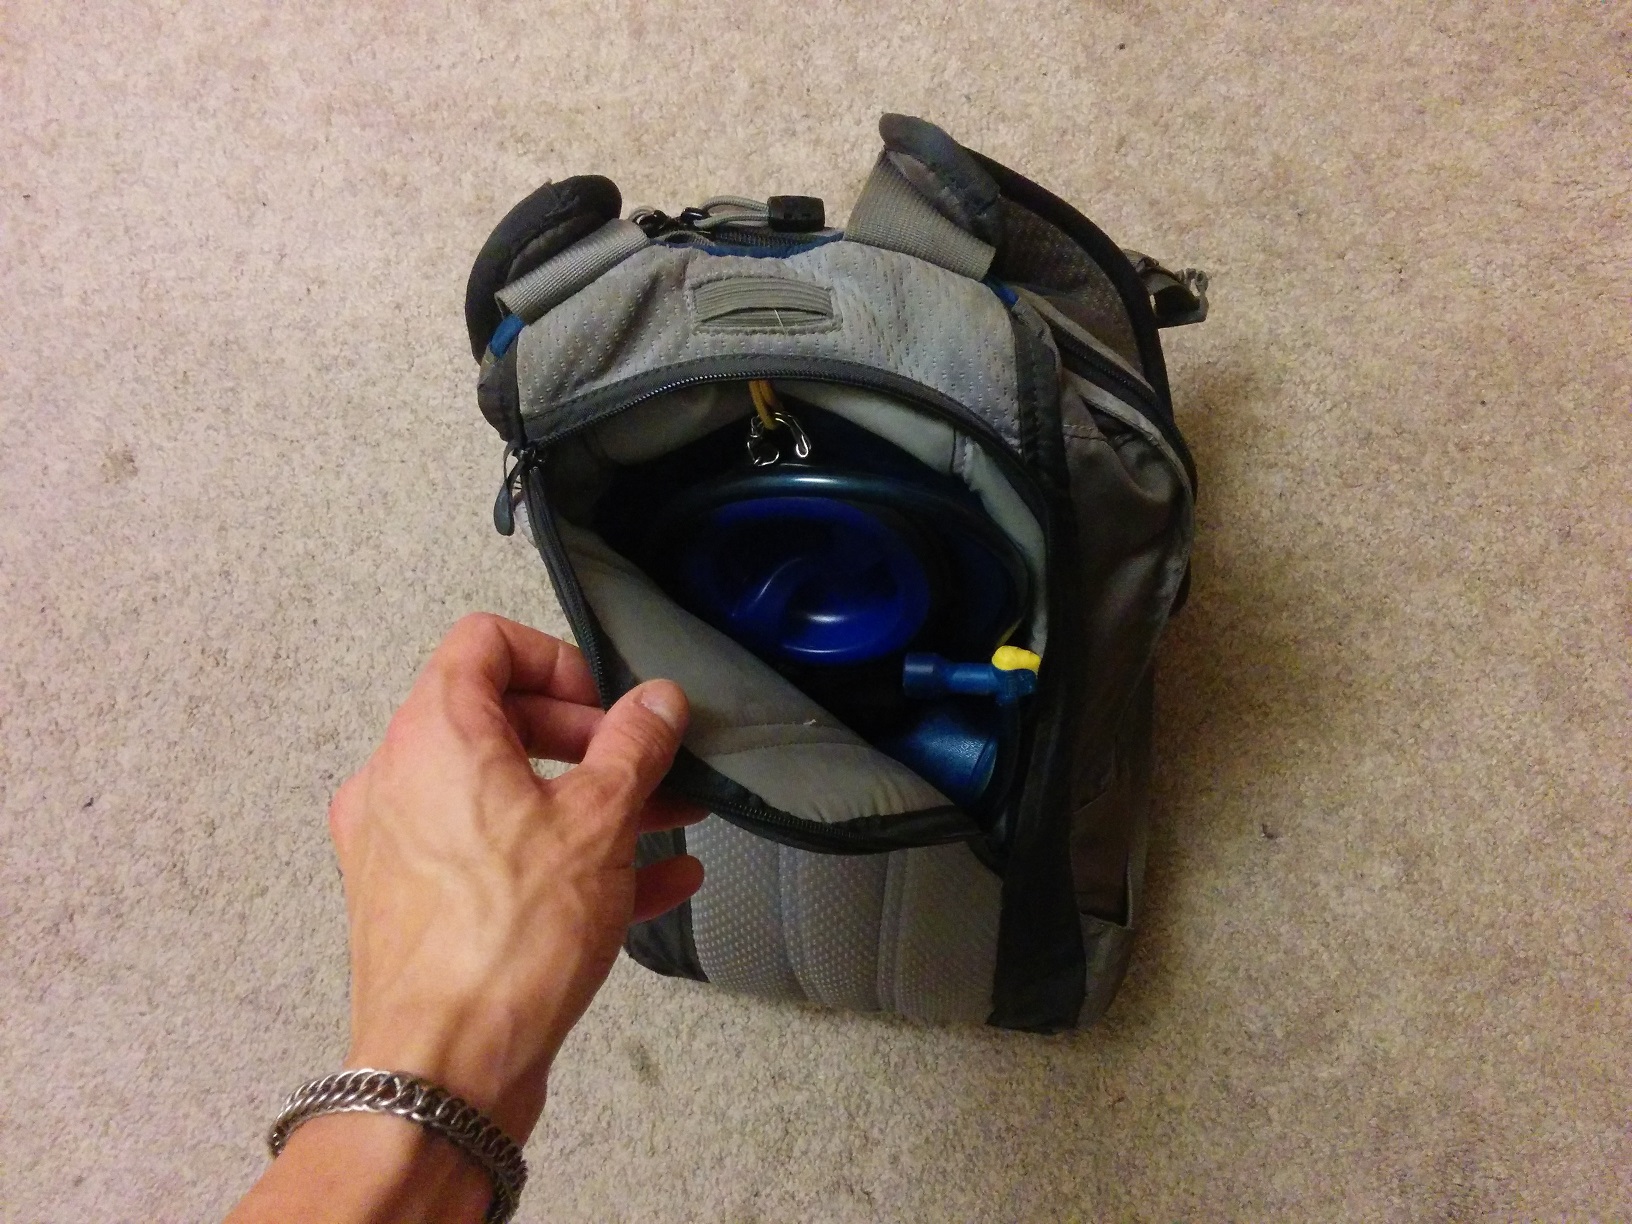 Showing the back compartment of the backpack, with a plastic water reservoir and tube inside.